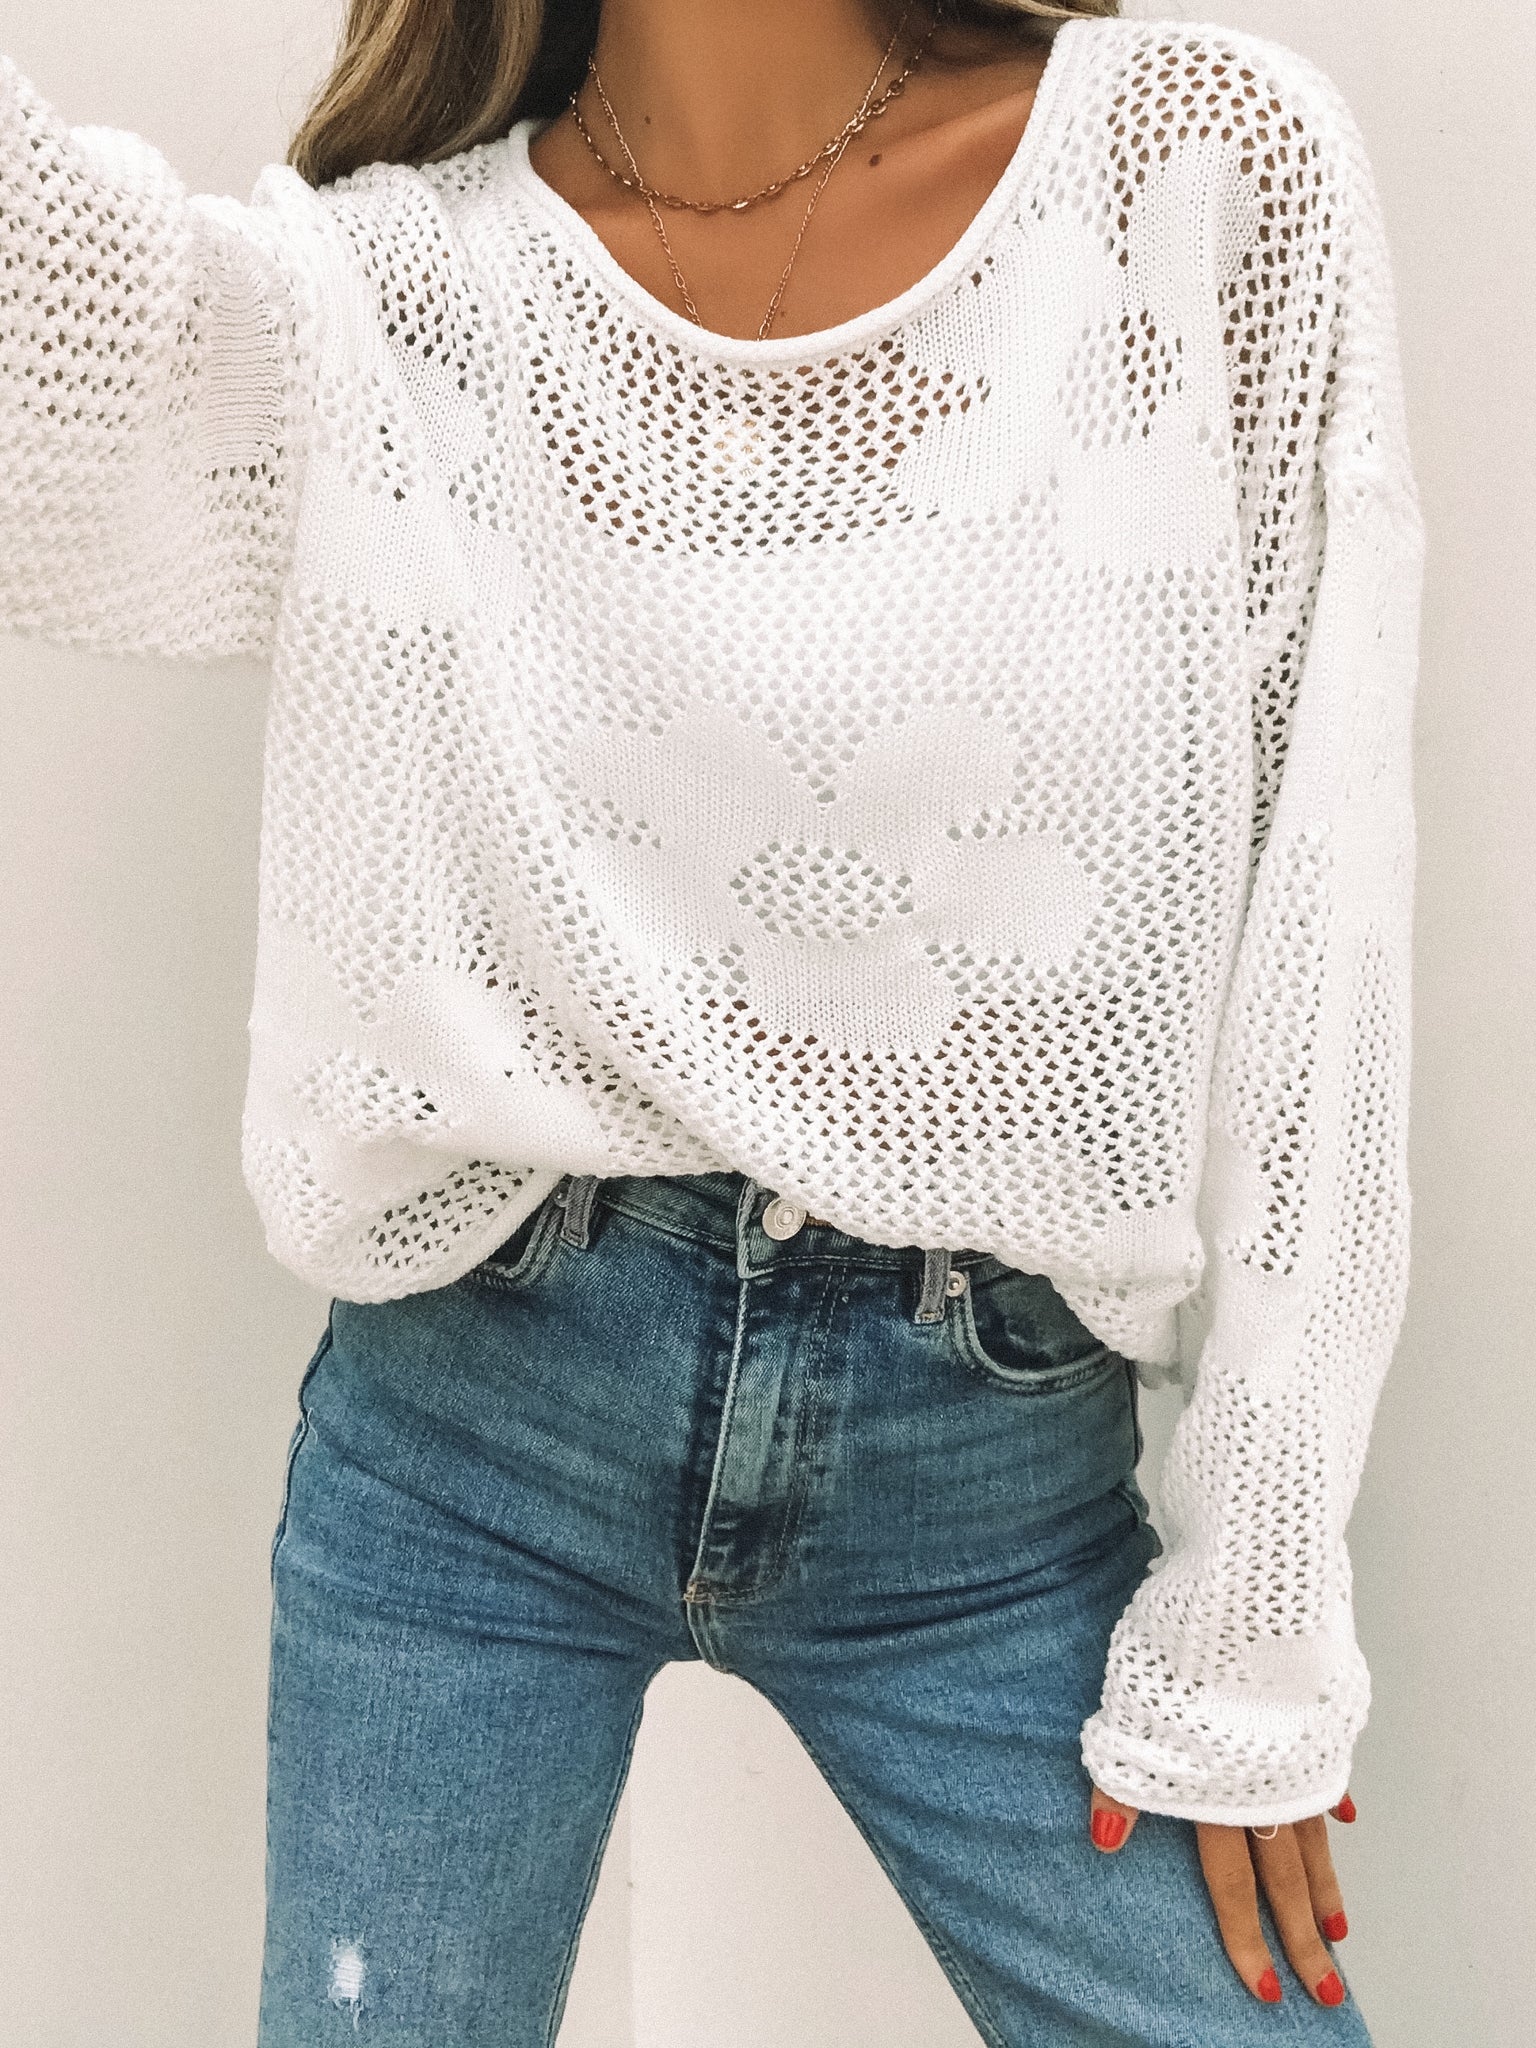 Tate Floral Crochet Top